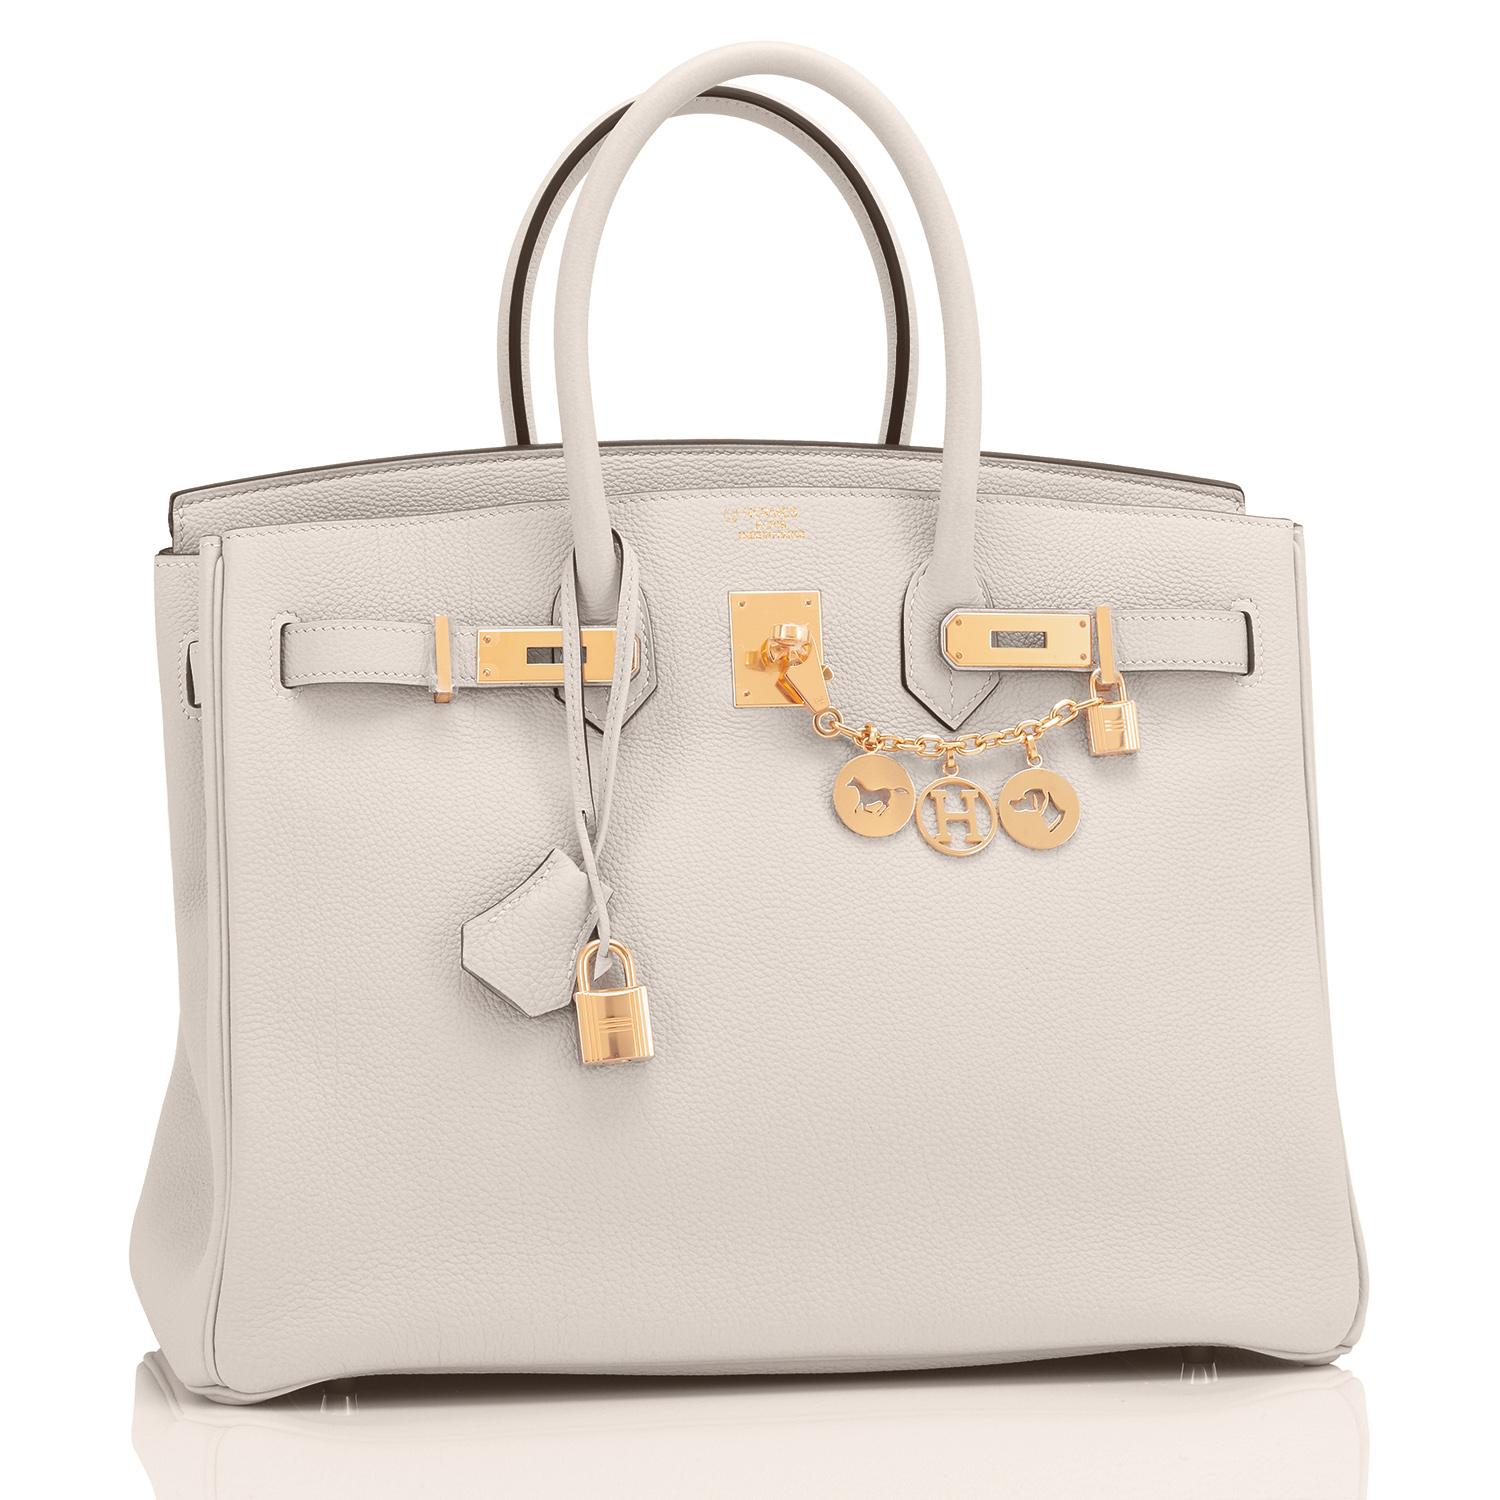 Hermes Birkin 35cm Nata Off White Cream Gold Hardware U Stamp, 2022
Nata with Gold Hardware is simply spectacular in person!
Just purchased from Hermes store; bag bears new interior 2022 U Stamp.
Brand New in Box. Store fresh. Pristine Condition